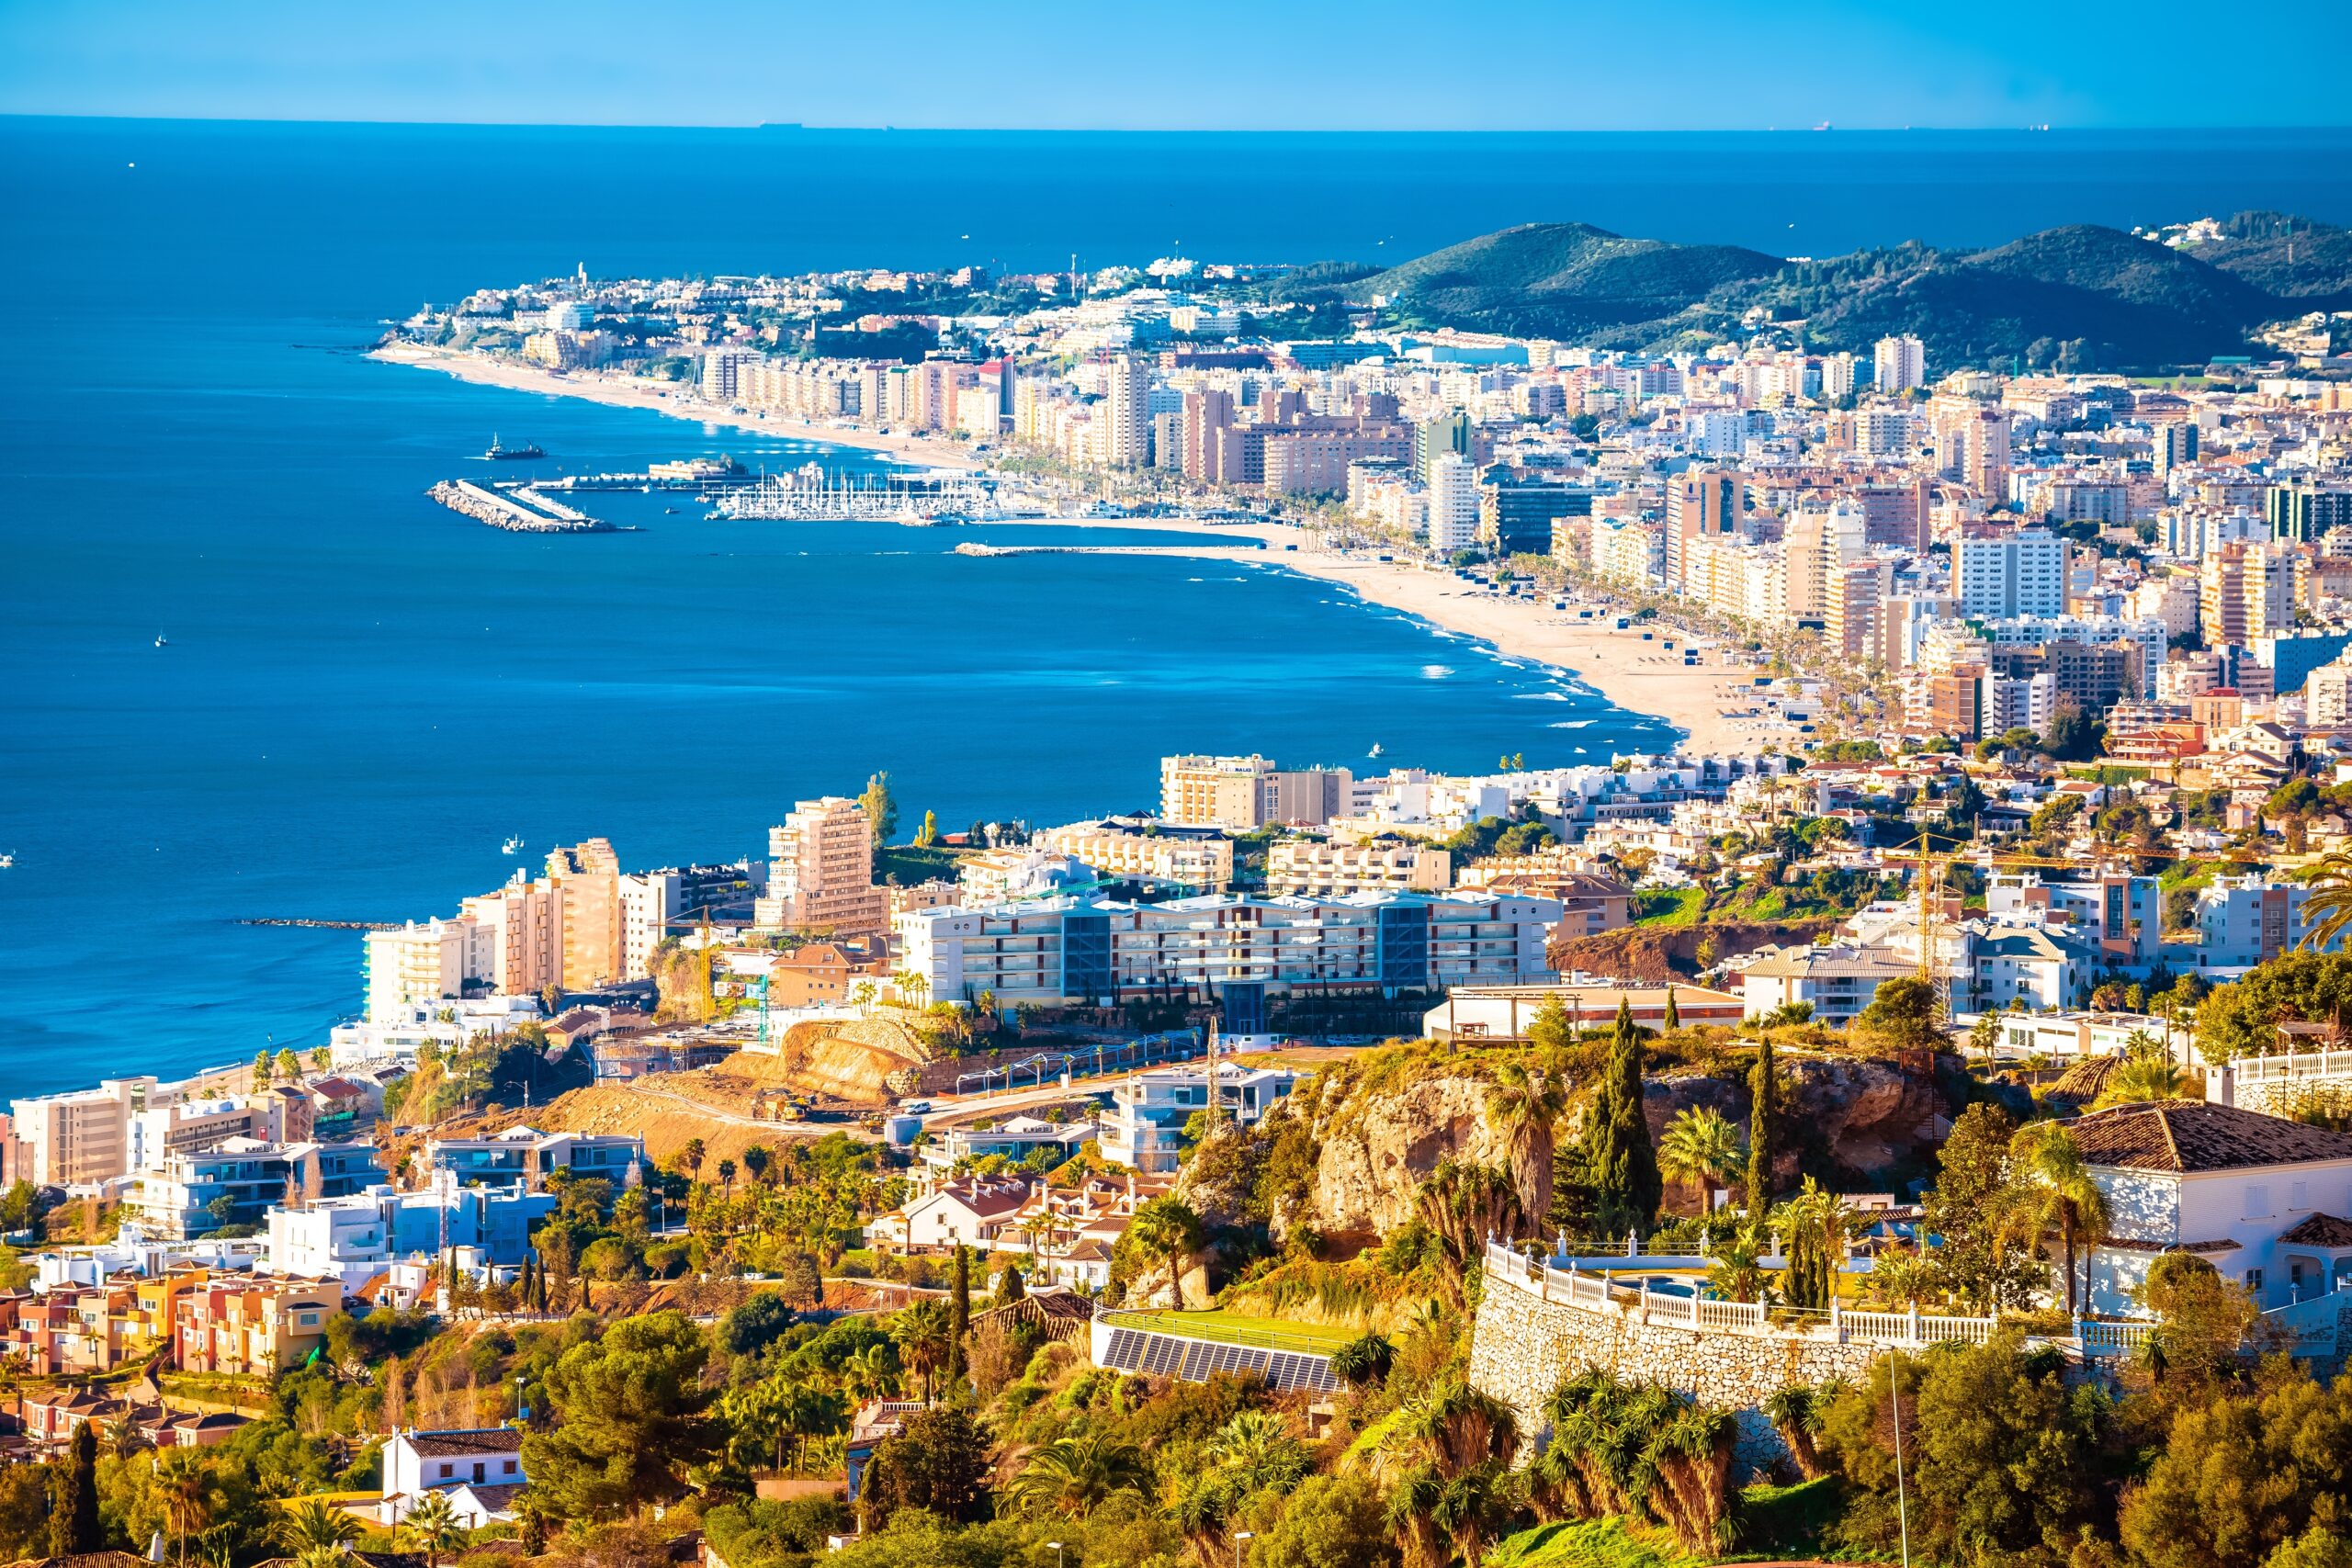 From MAlaga to Estepona A stunning view of the Costa del Sol coastline with crystal clear waters and sandy beaches.